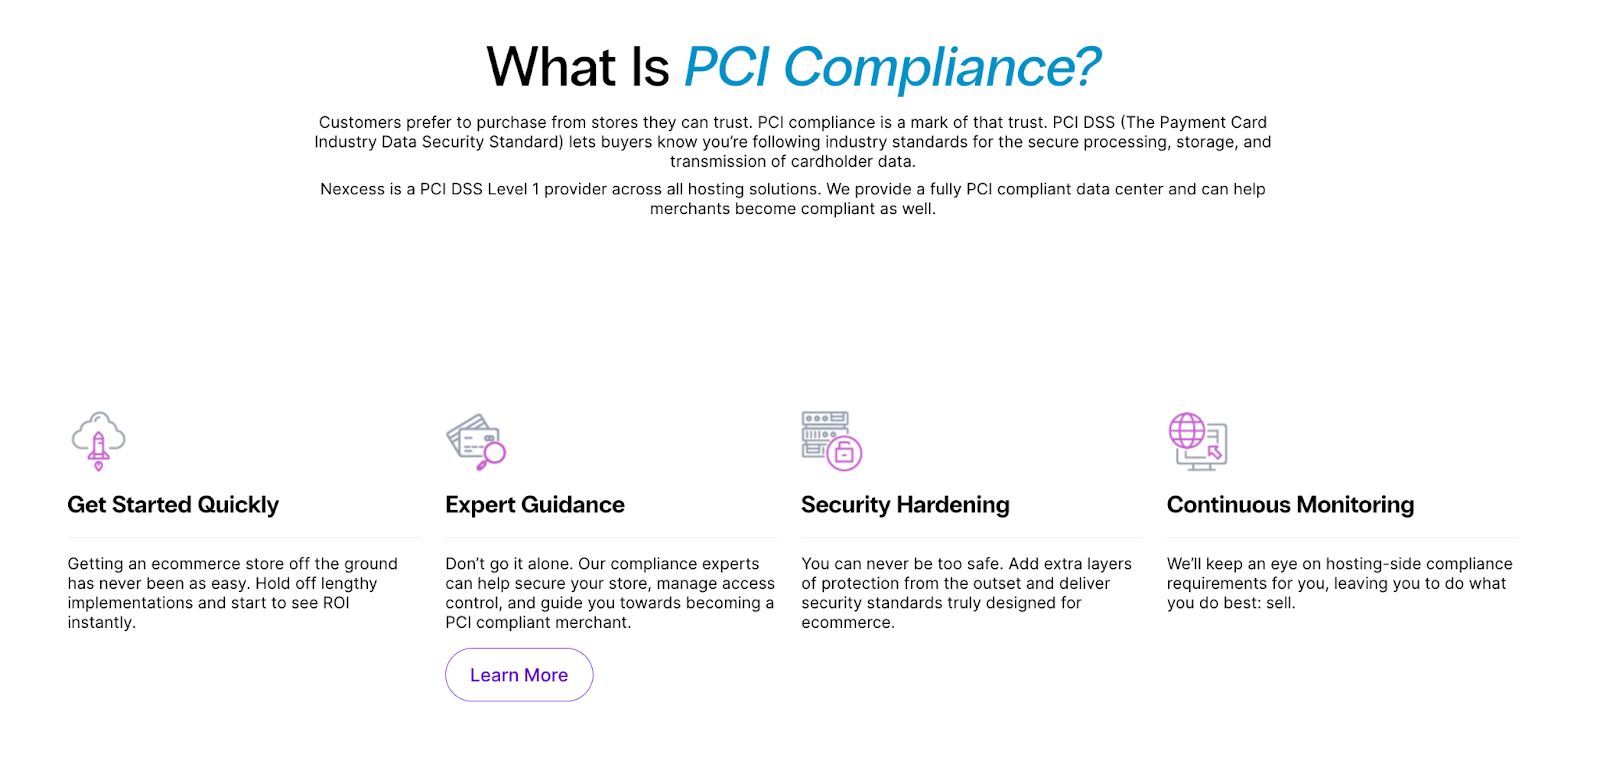 Private clouds can help your business address compliance elements like PCI compliance and HIPAA compliant hosting.